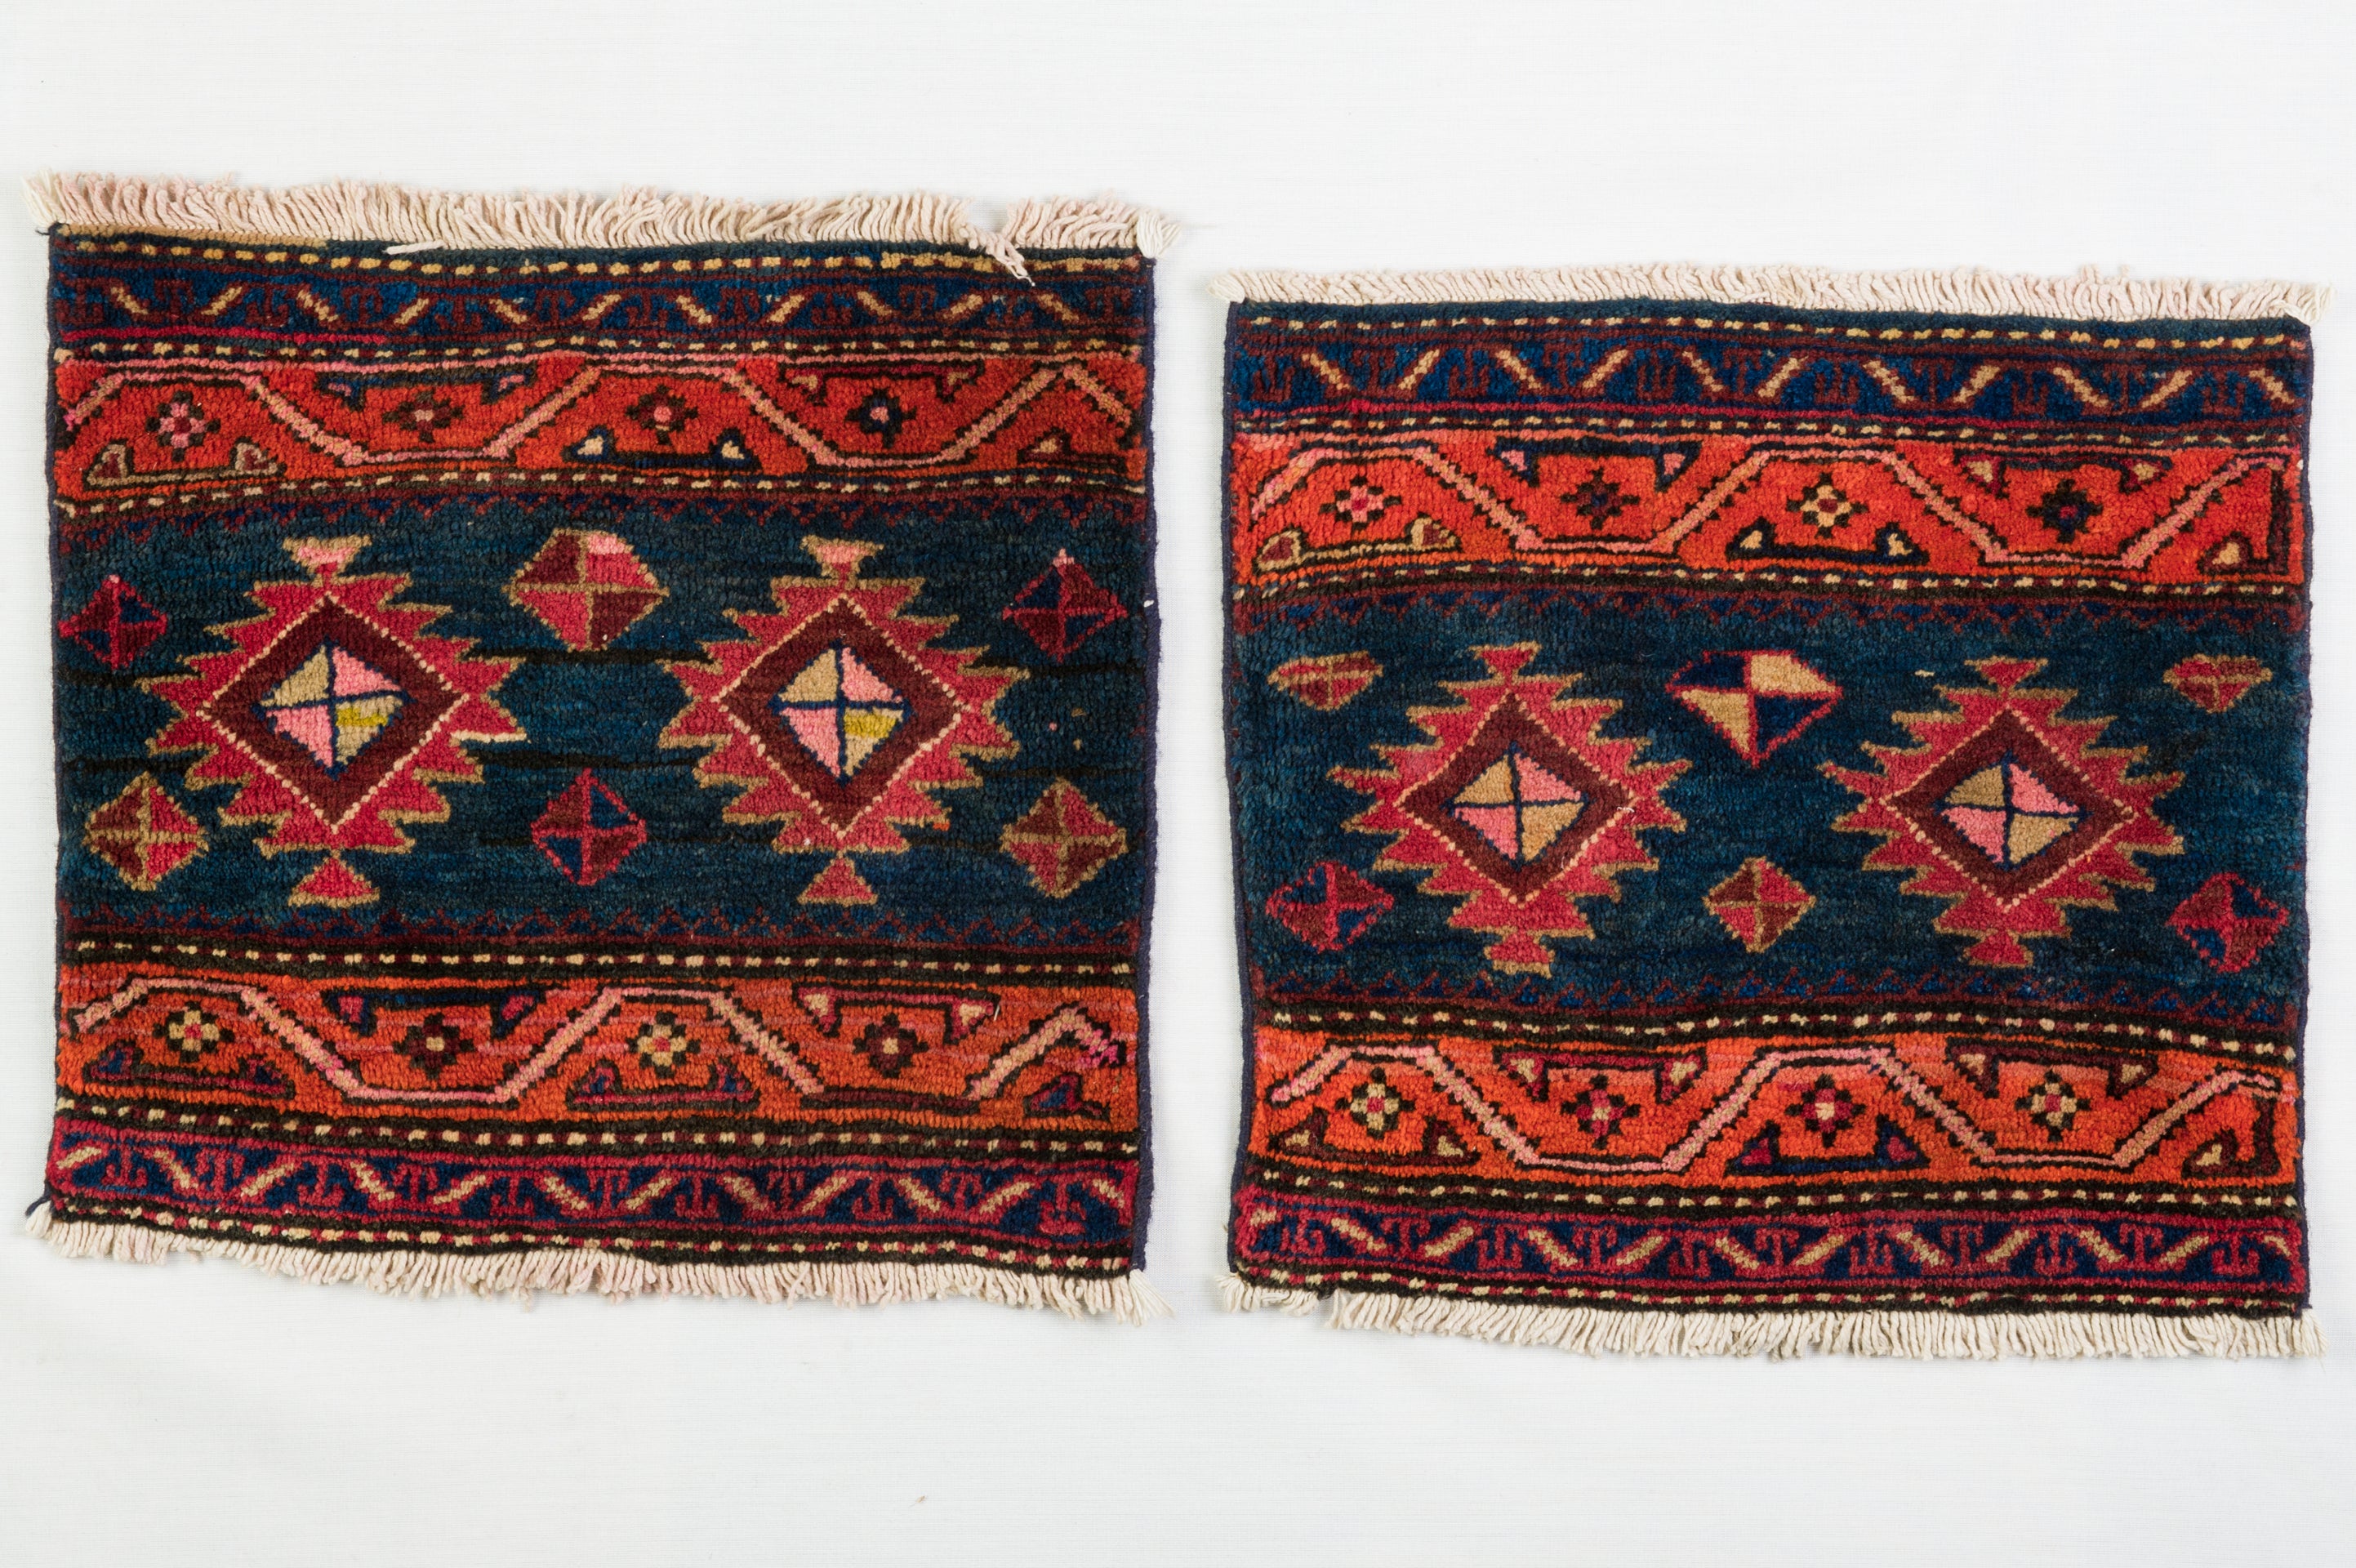 Rare little pair of Kurdistan rugs, recovered from an ancient saddlebag.: over time the central part has worn out .
You can use on two lounge chairs or with two little tables or making cushions.  These little carpets can be changed into newspaper